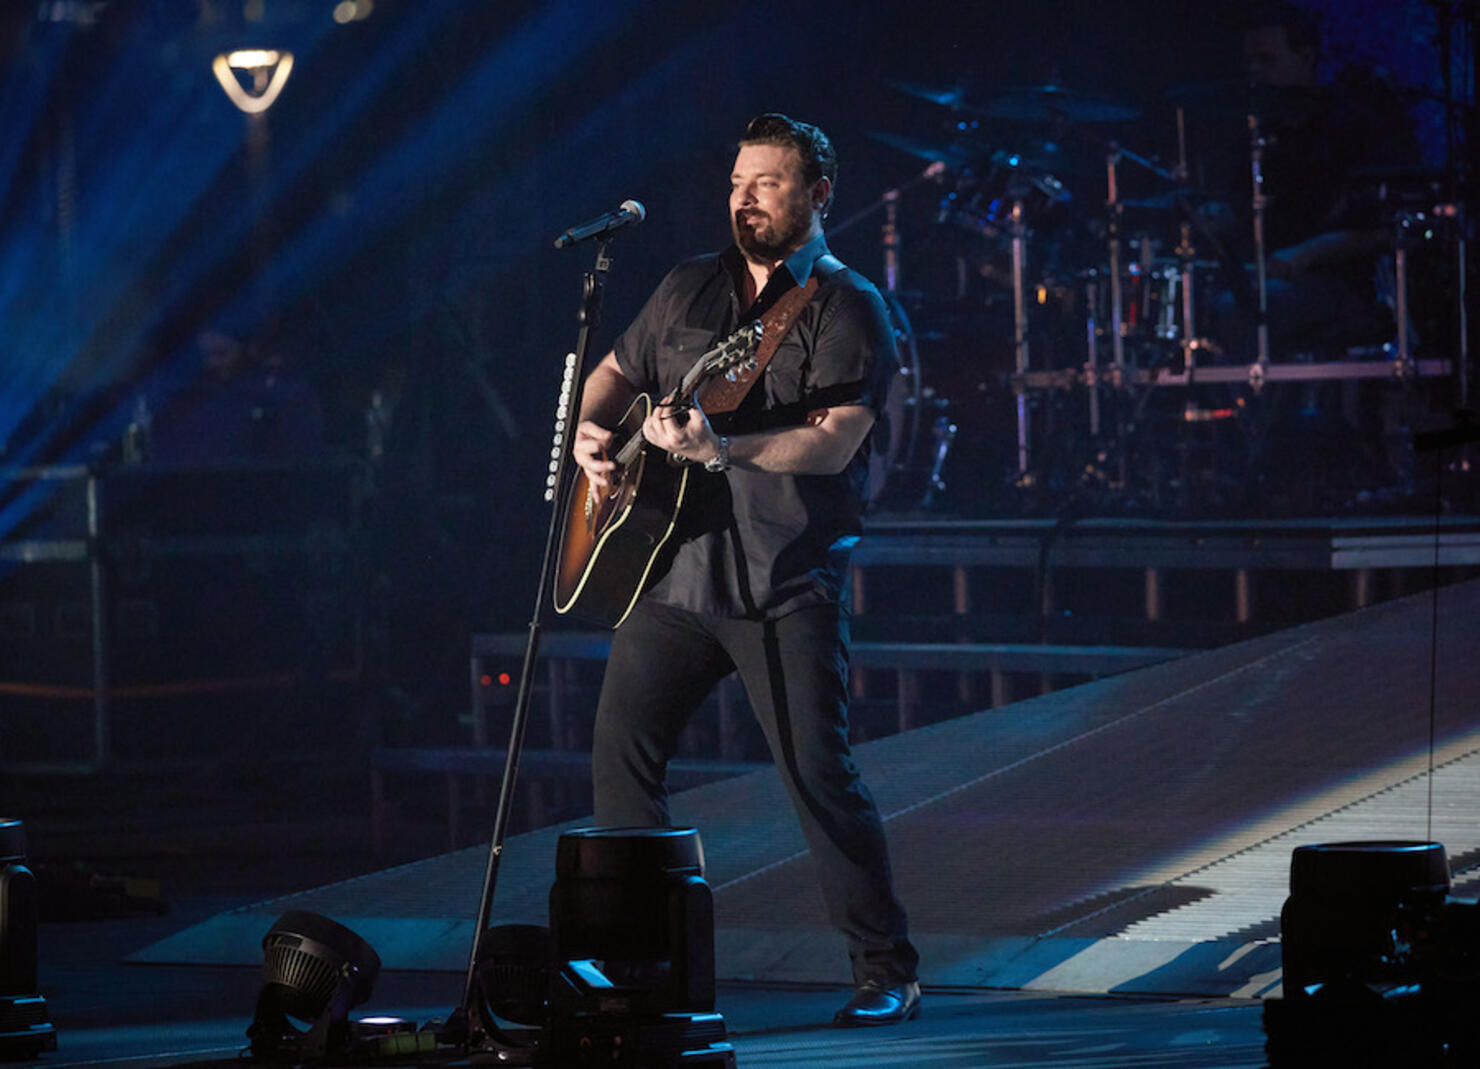 Chris Young Turned His Free Nashville Concert Into A Music Video Shoot